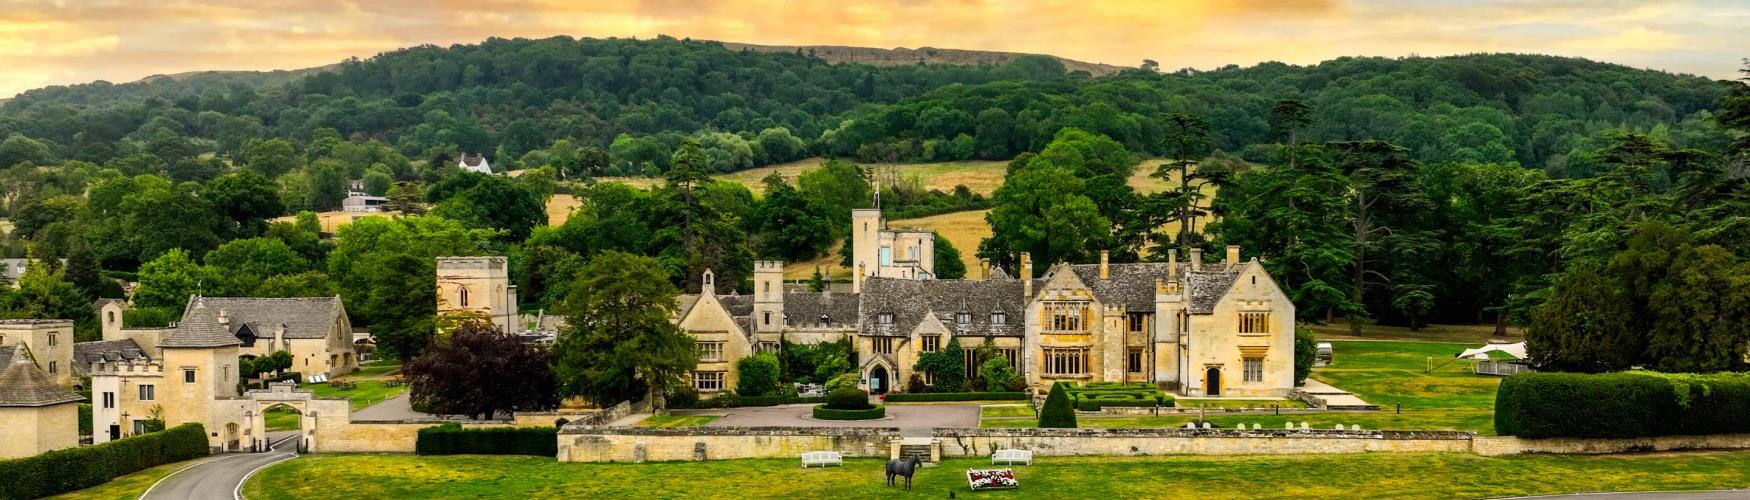 Ellenborough Park hotel surrounded by beautiful countryside